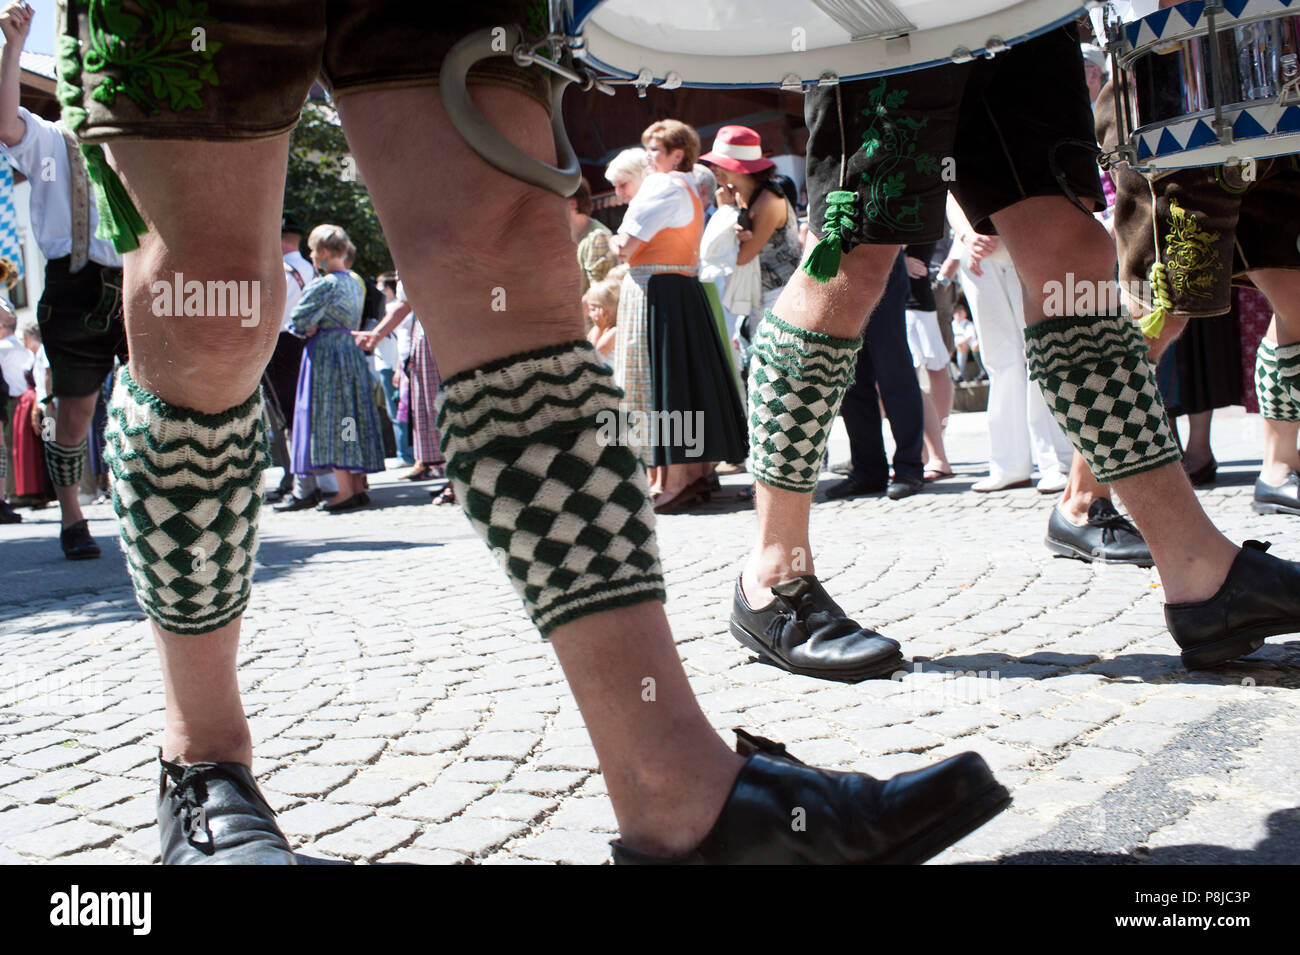 Procession of a Bavarian brass band in the city of Garmisch-Partenkirchen. Stock Photo